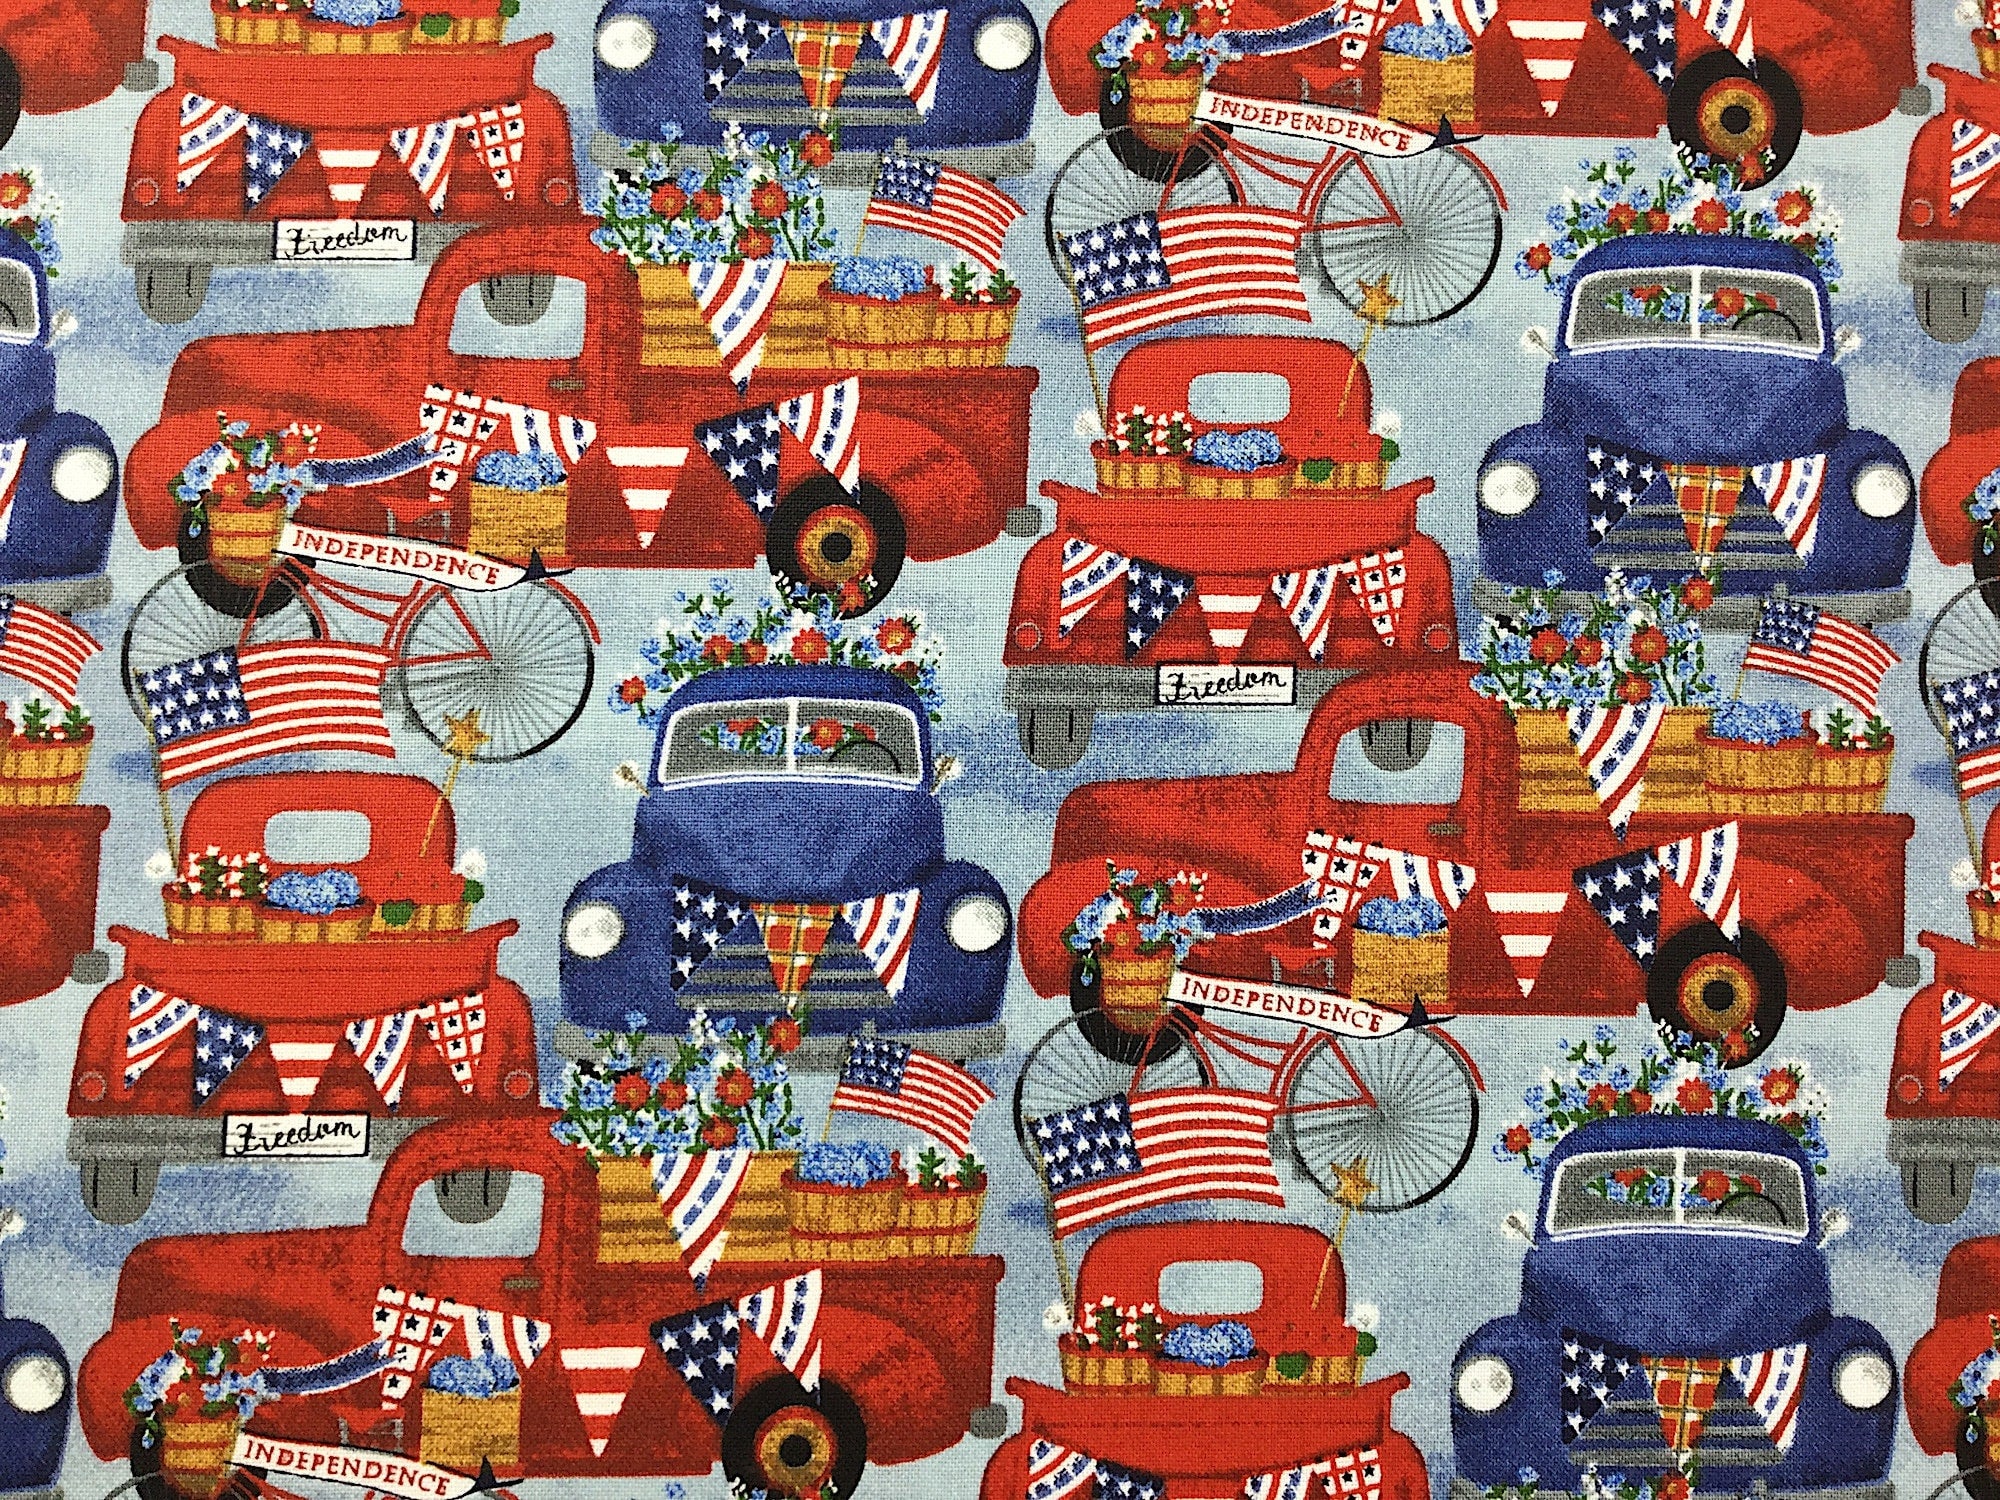 This fabric is called American Spirit American Trucks and has red and blue trucks on a blue background. The trucks are filled with Red, White and Blue Flowers and are draped in patriotic flags.